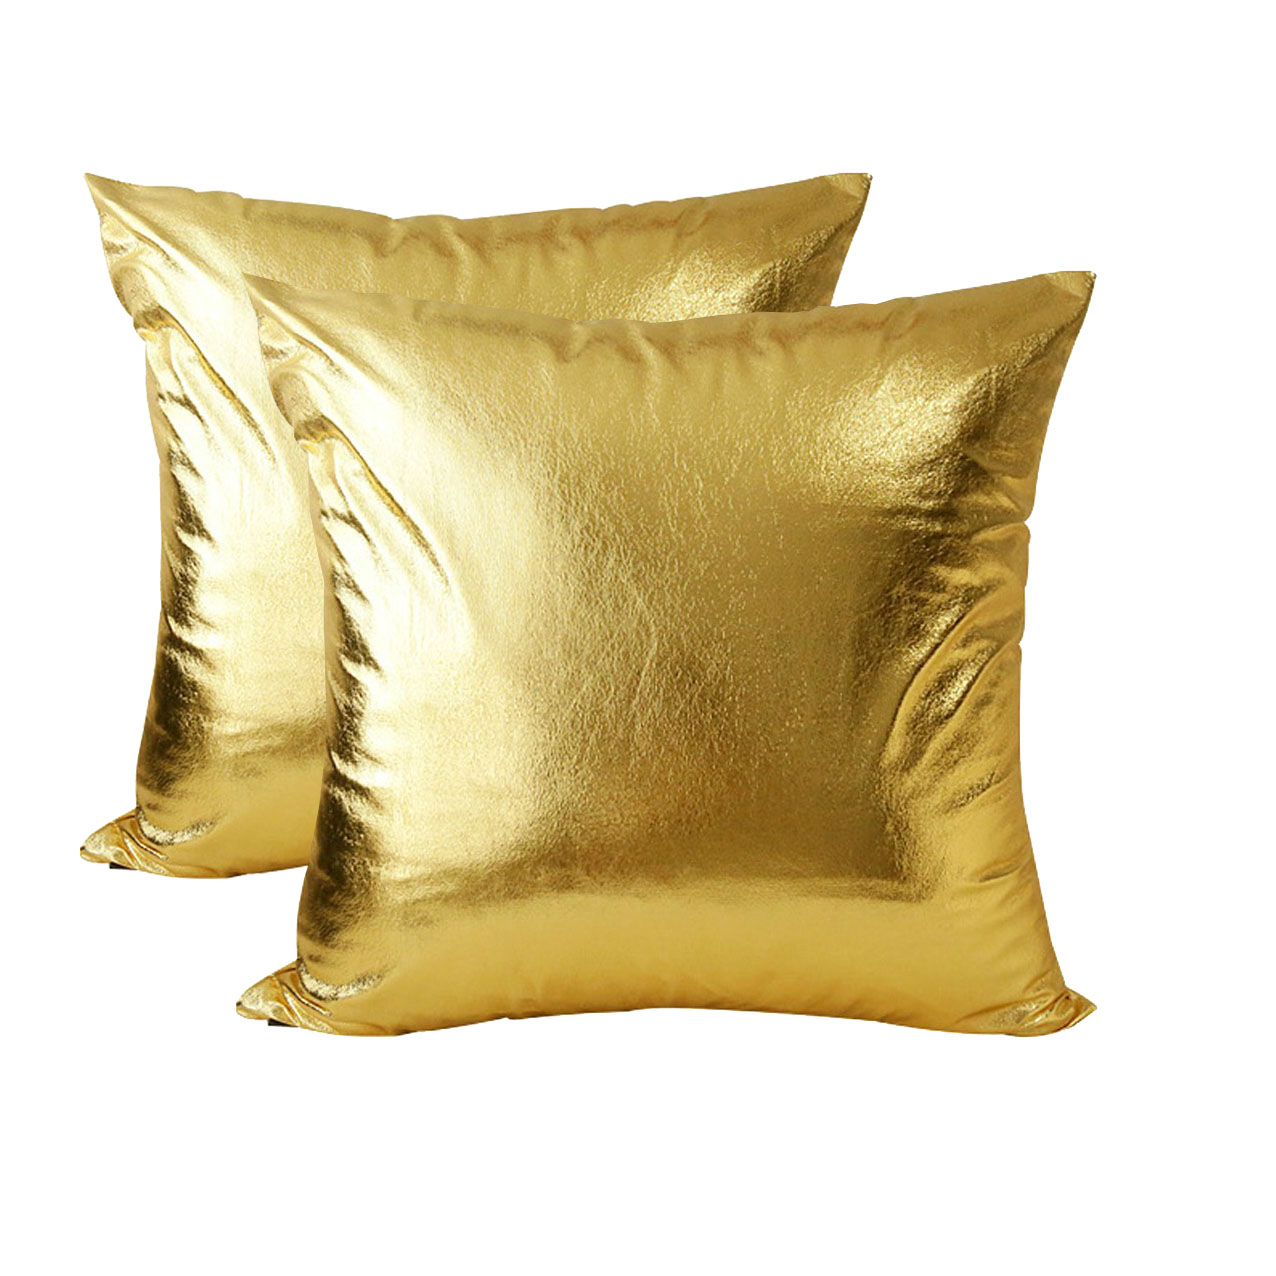 Golden Leather Pillow Cover Design Sold, Leather Pillow Cover